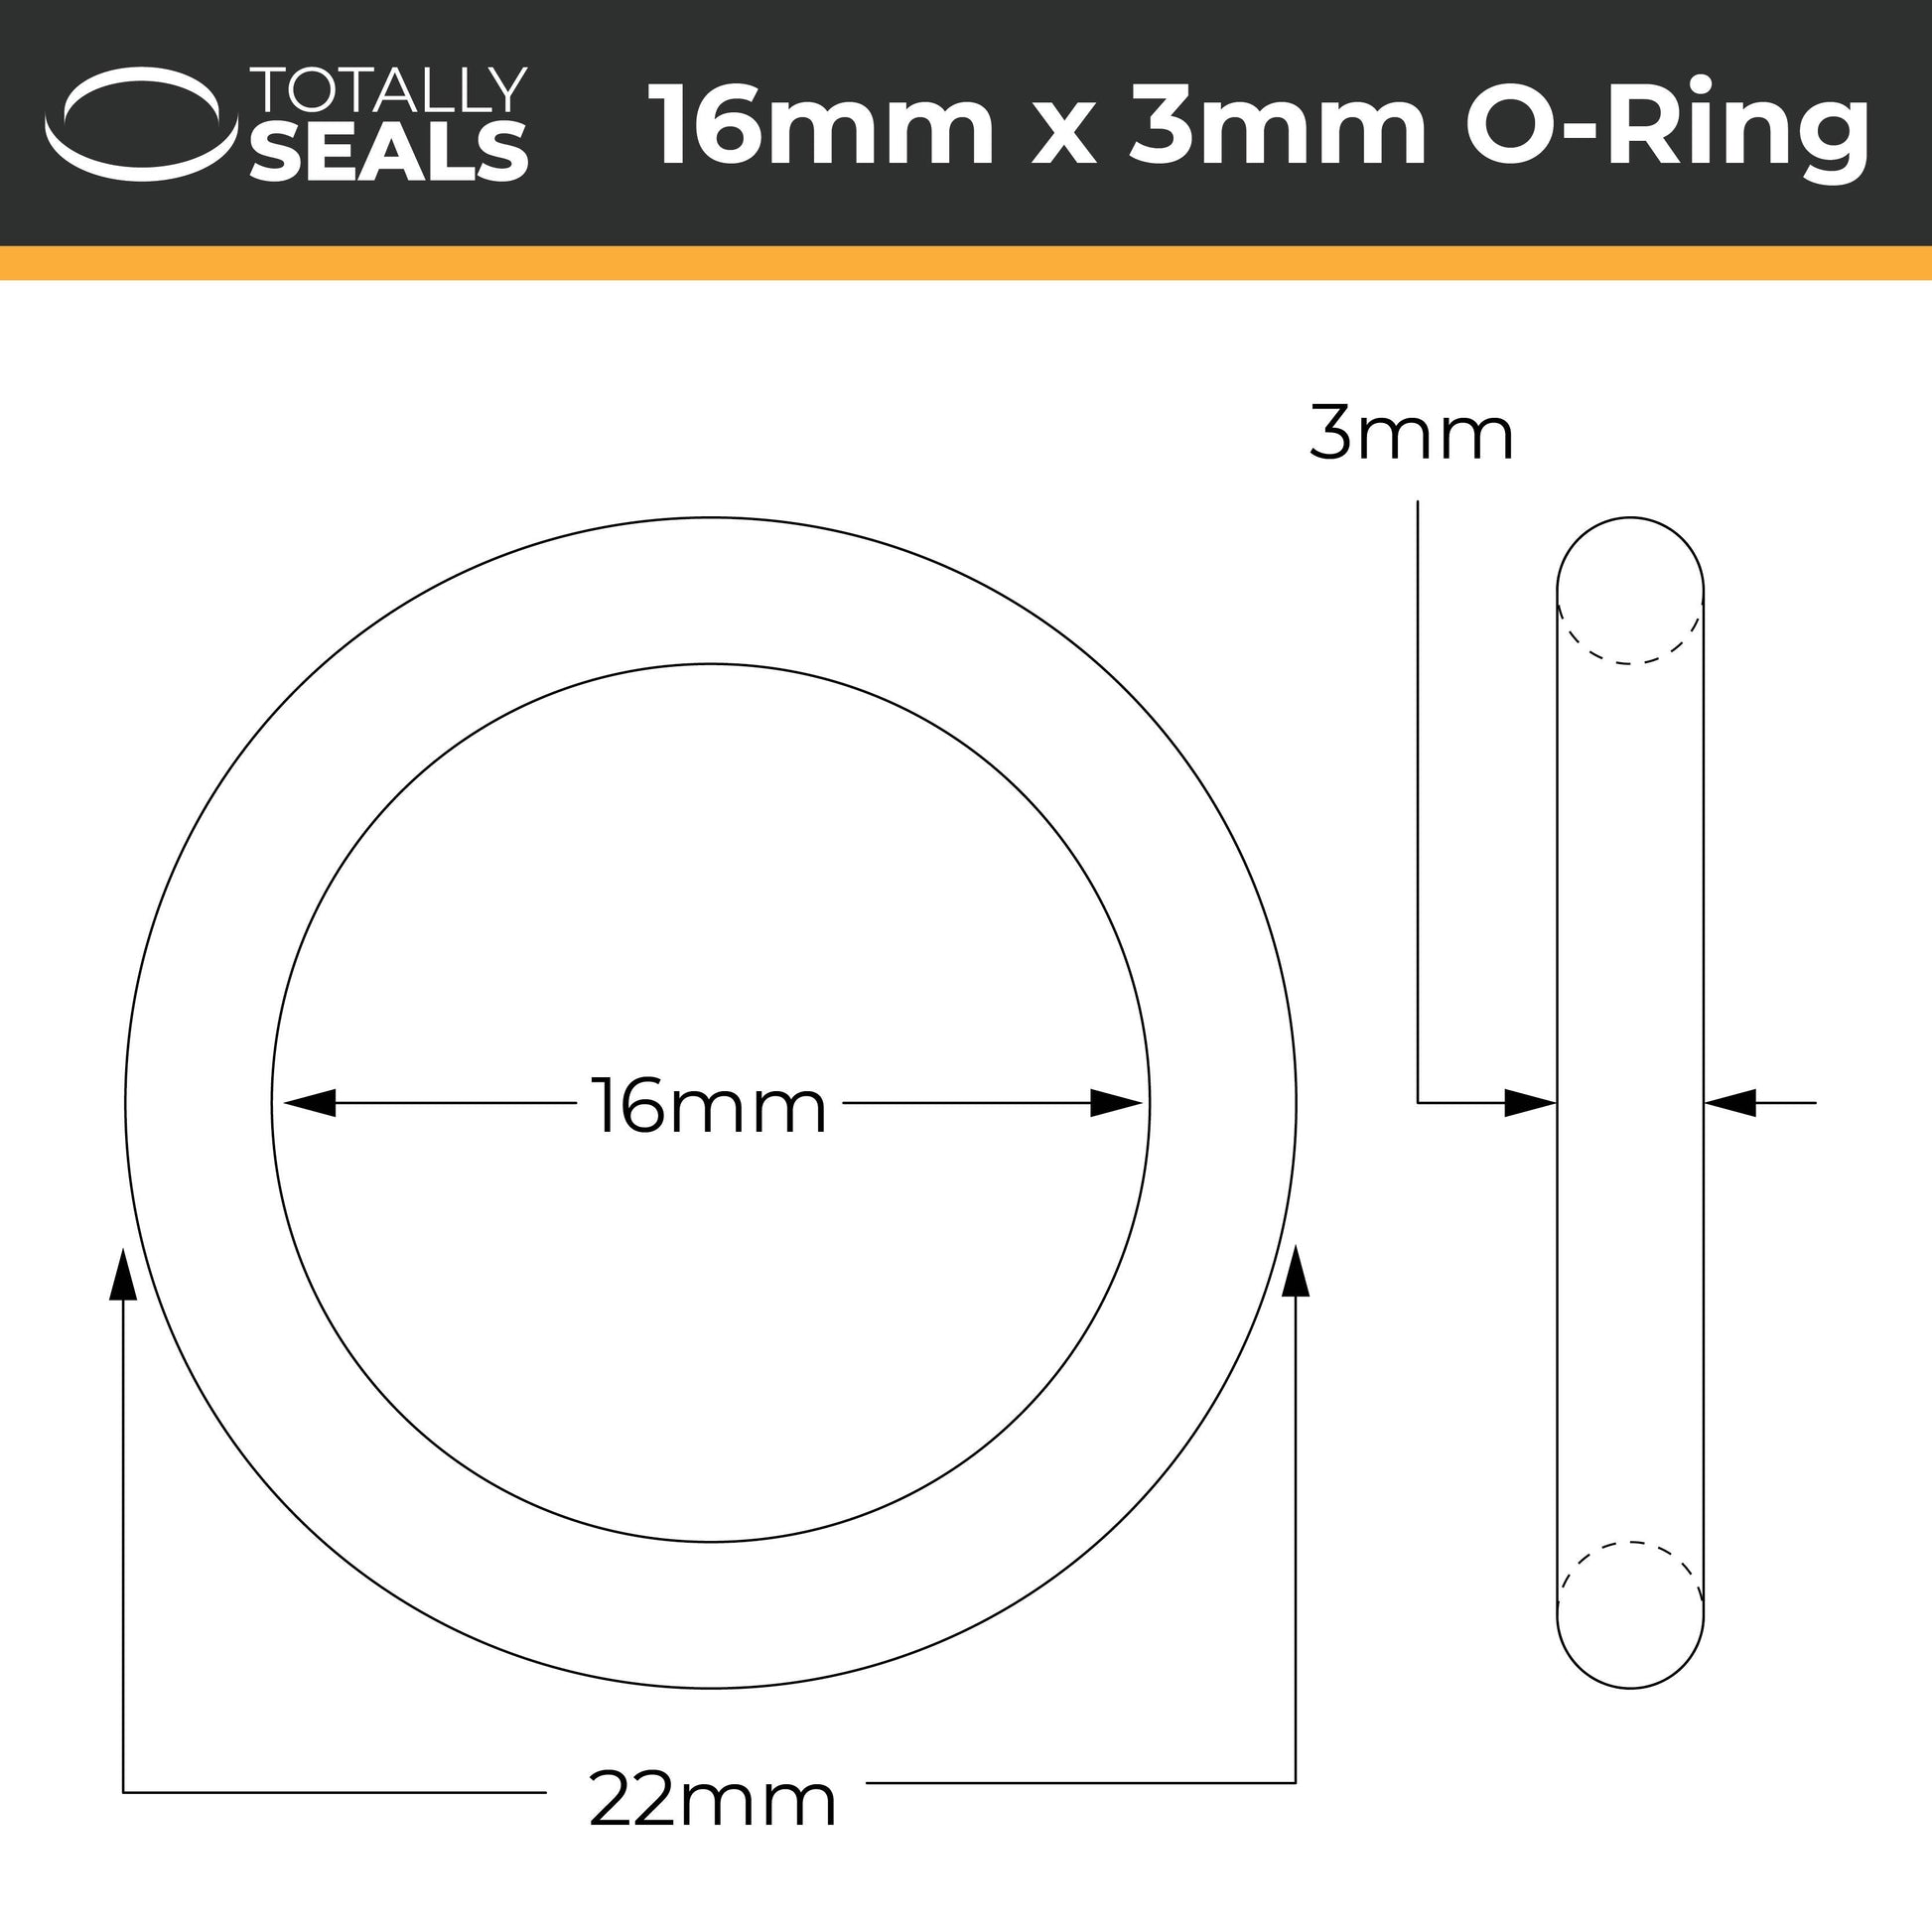 16mm x 3mm (22mm OD) Nitrile O-Rings - Totally Seals®